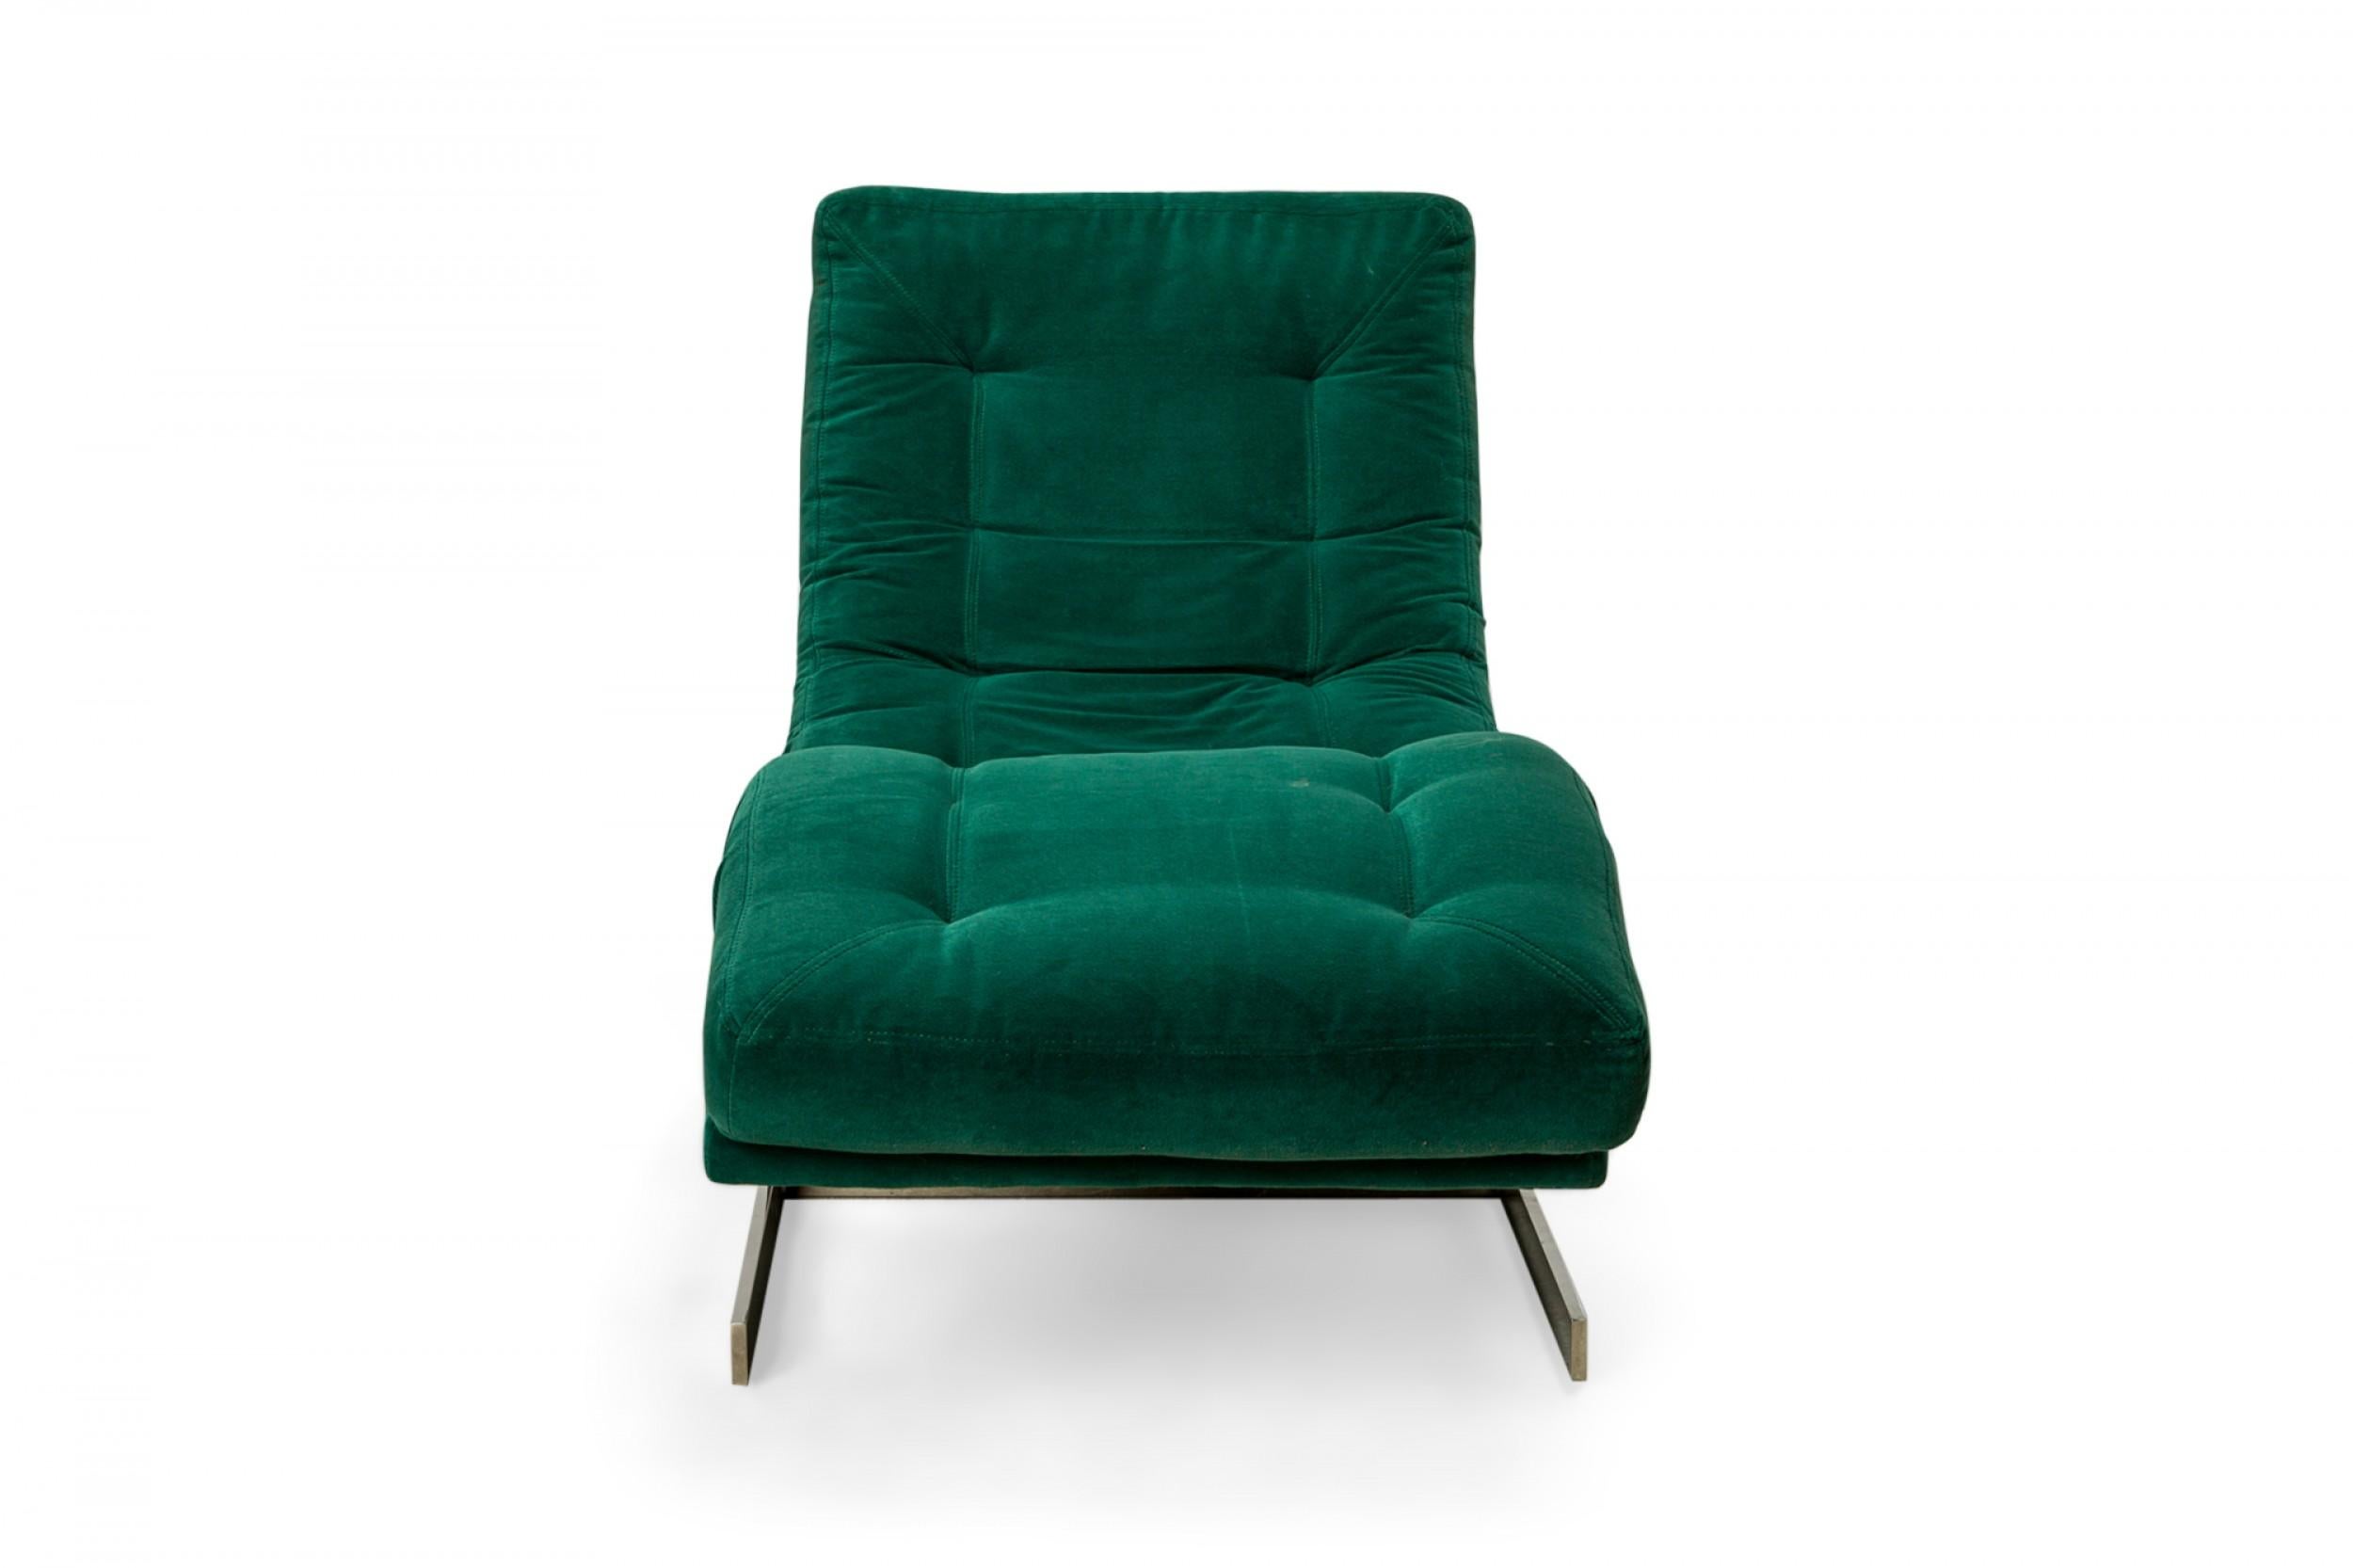 American Mid-Century 'wave' form chaise lounge with deep green velour button tufted upholstery with a T-shaped polished chrome base. (CARSONS)(Available in different upholstery: DUF0351, DUF0352, DUF0353).